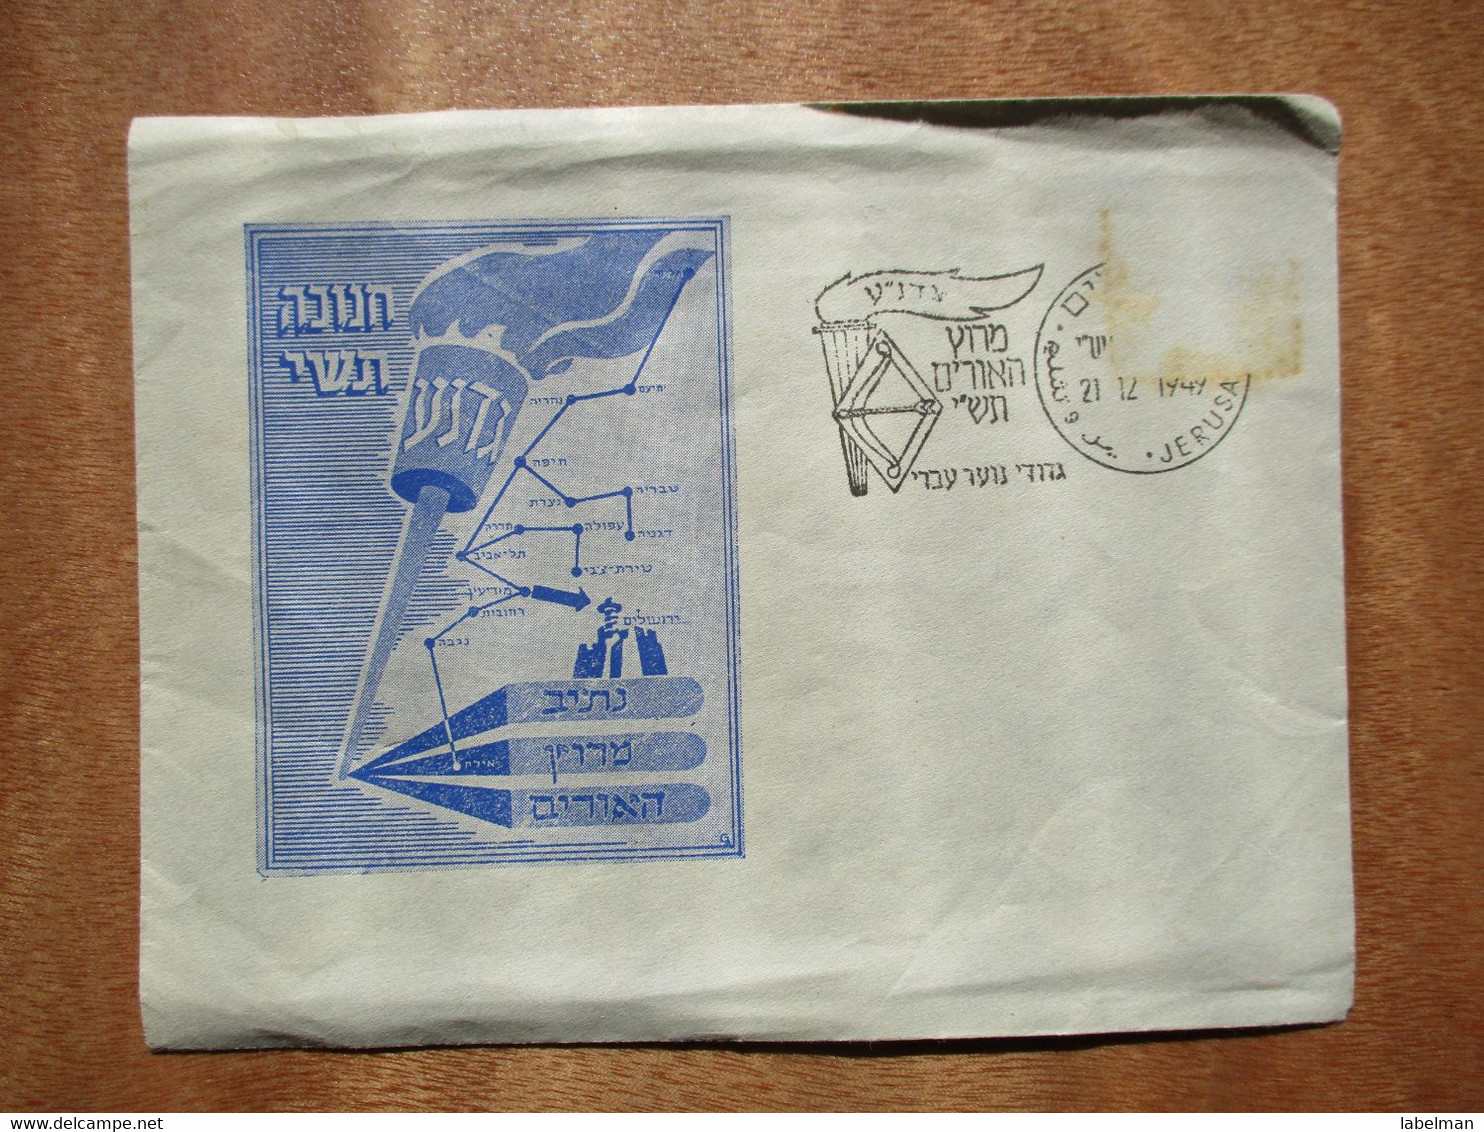 1949 EVENT POO FIRST DAY POST OFFICE OPENING ARMY GADNA COMPETITION JERUSALEM CACHET COVER STAMP ENVELOPE ISRAEL JUDAICA - Cartas & Documentos